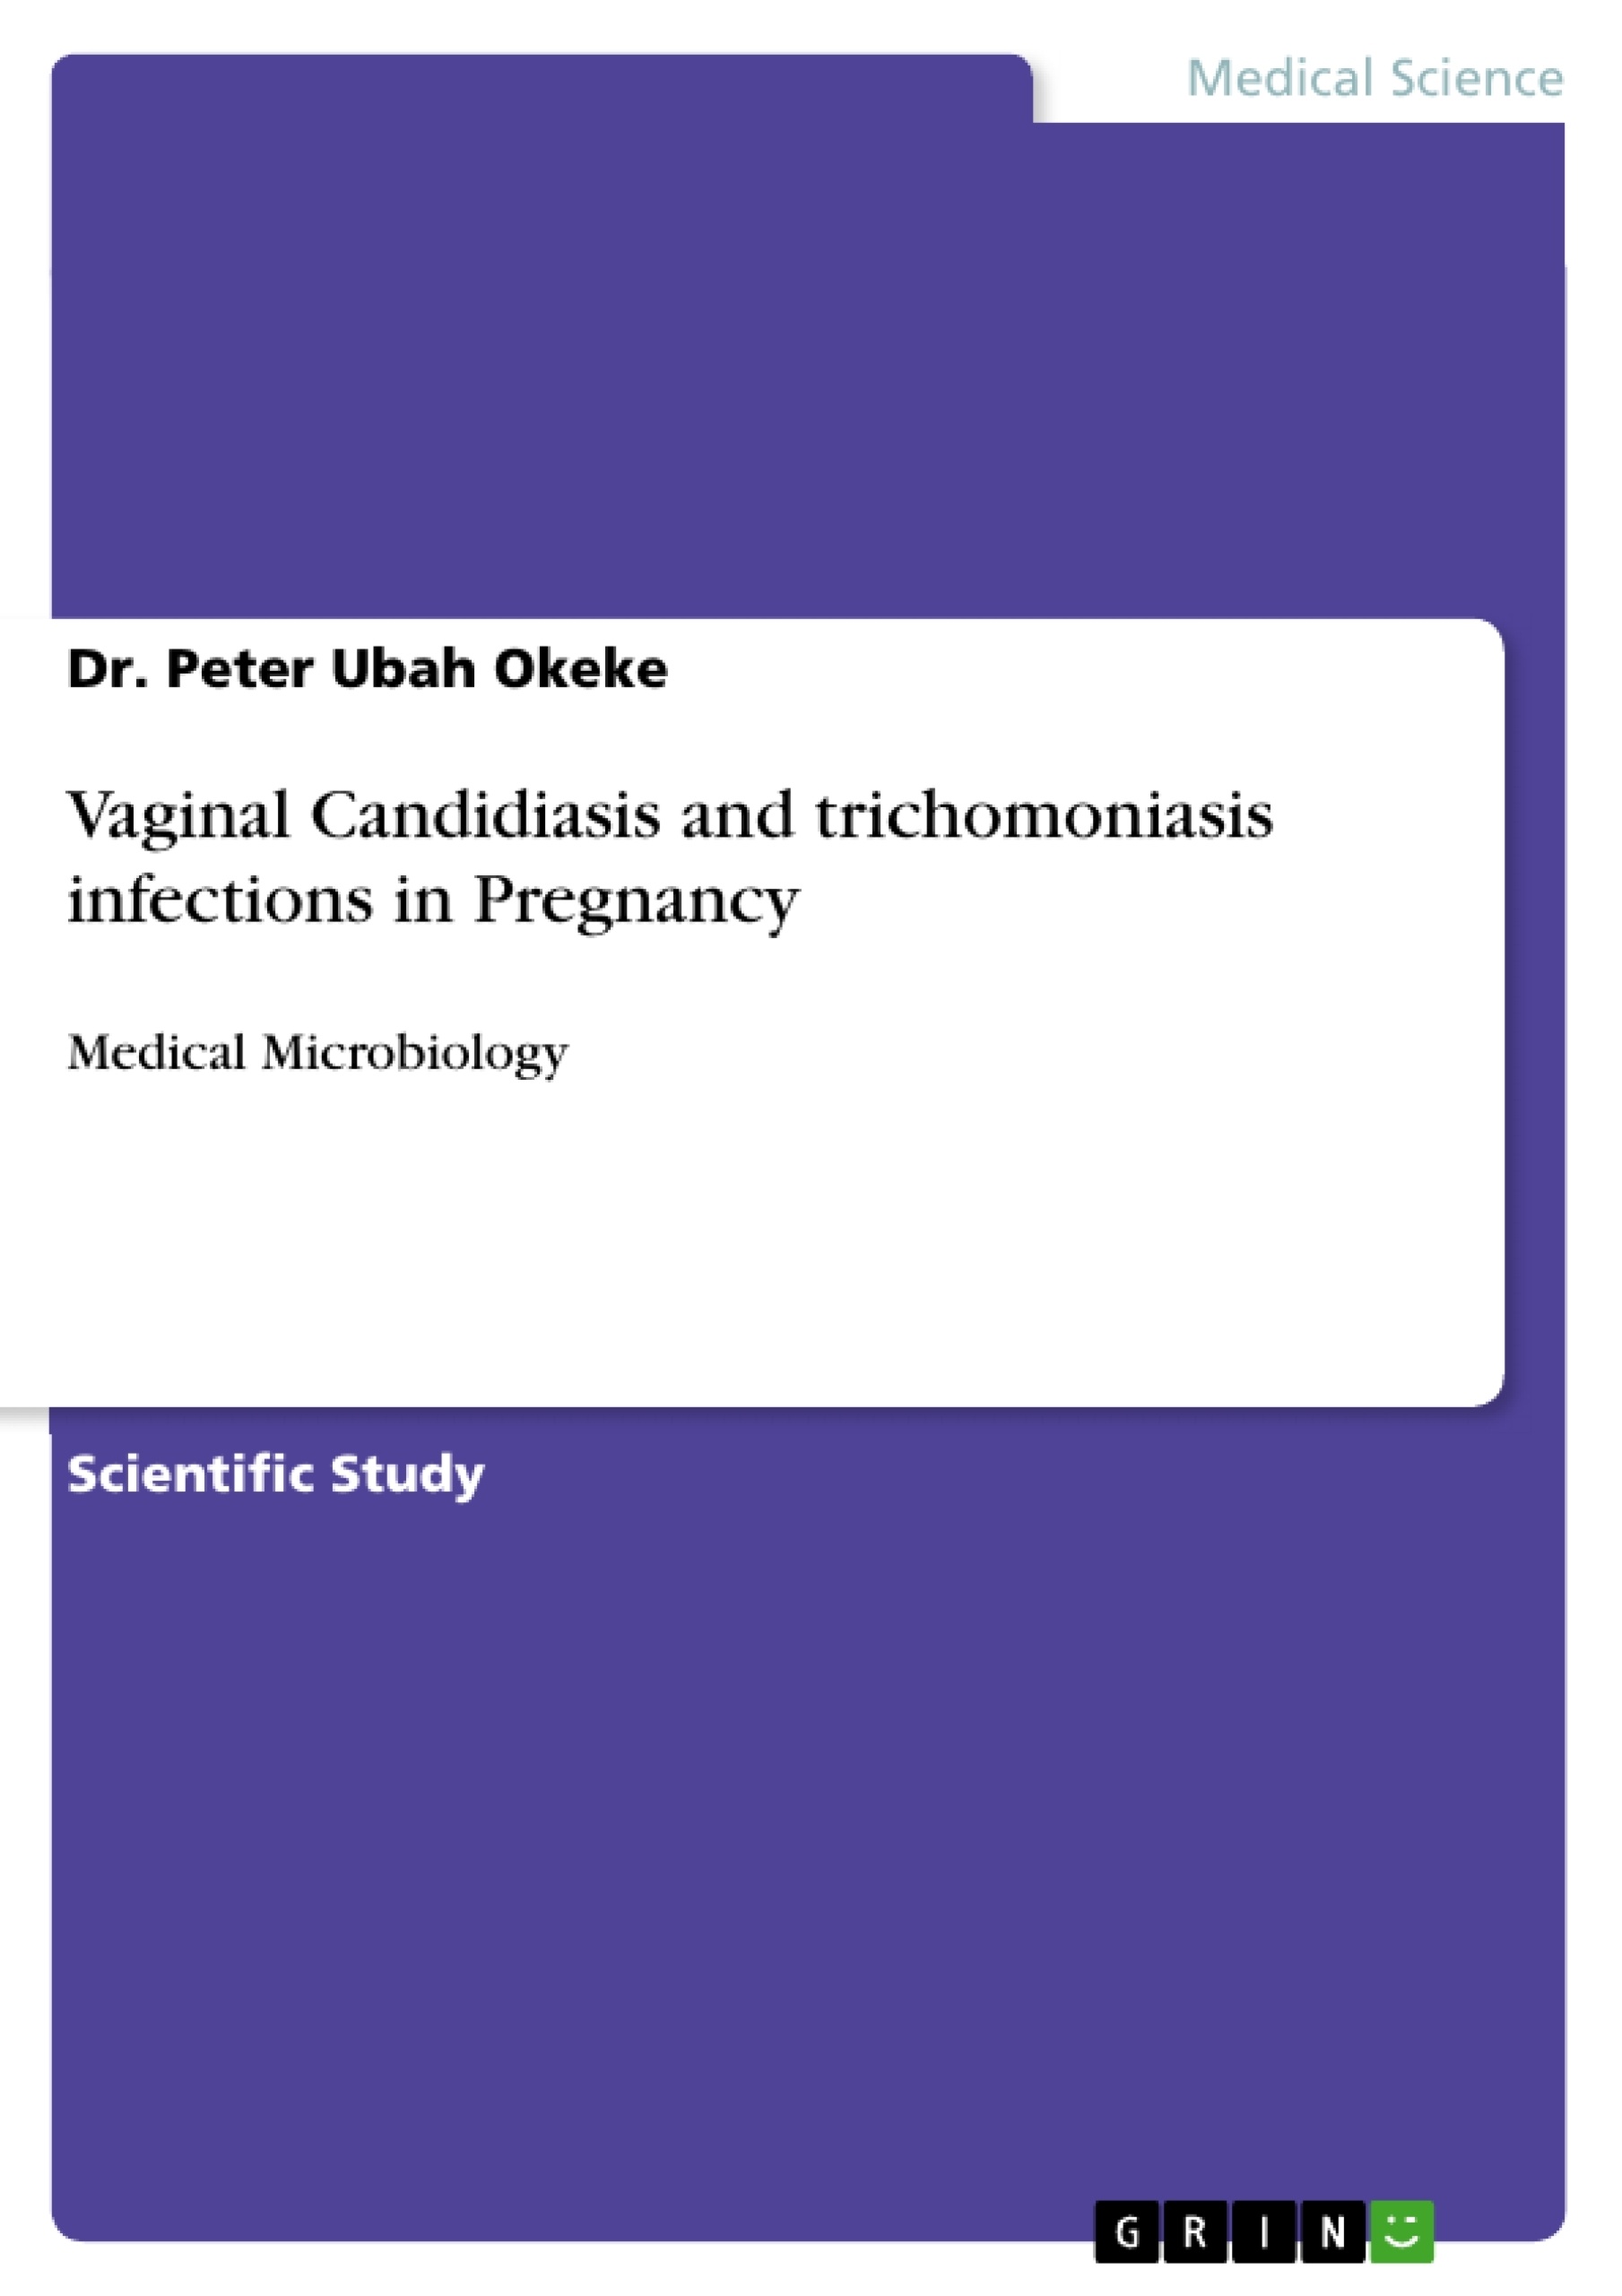 Titre: Vaginal Candidiasis and trichomoniasis infections in Pregnancy